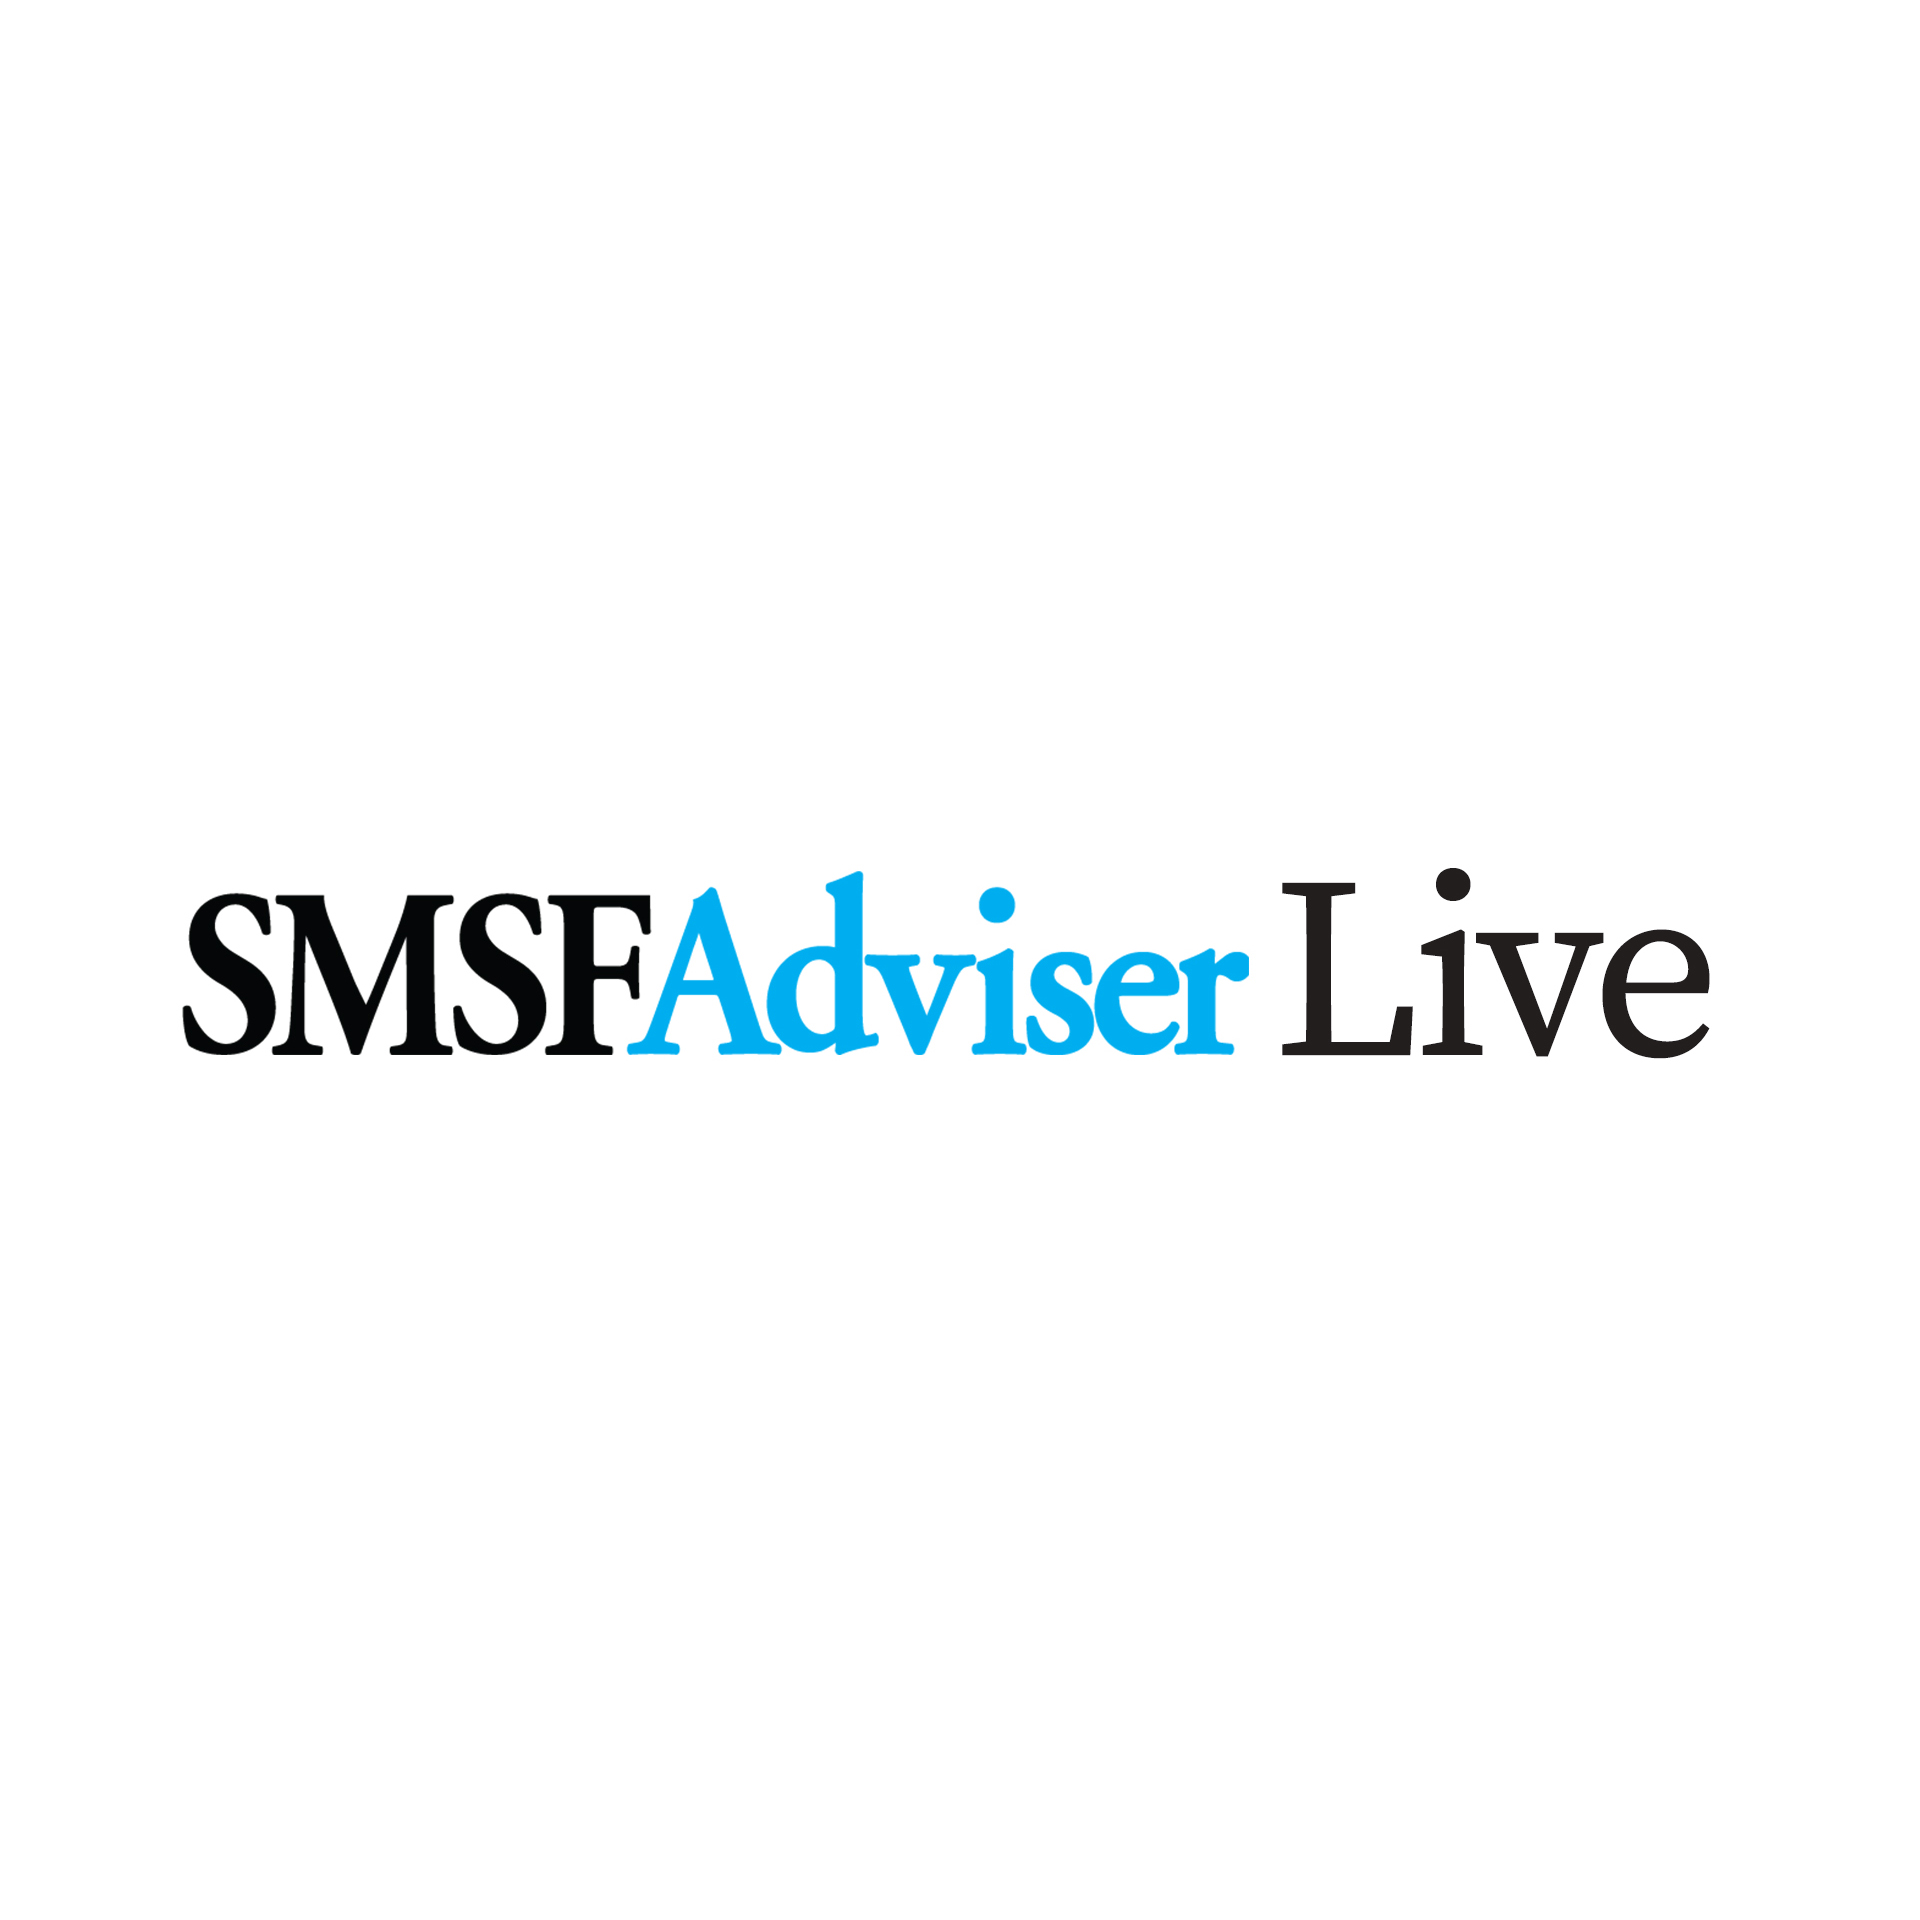 SMSF Adviser Live: The big-ticket superannuation policies under the Liberal government